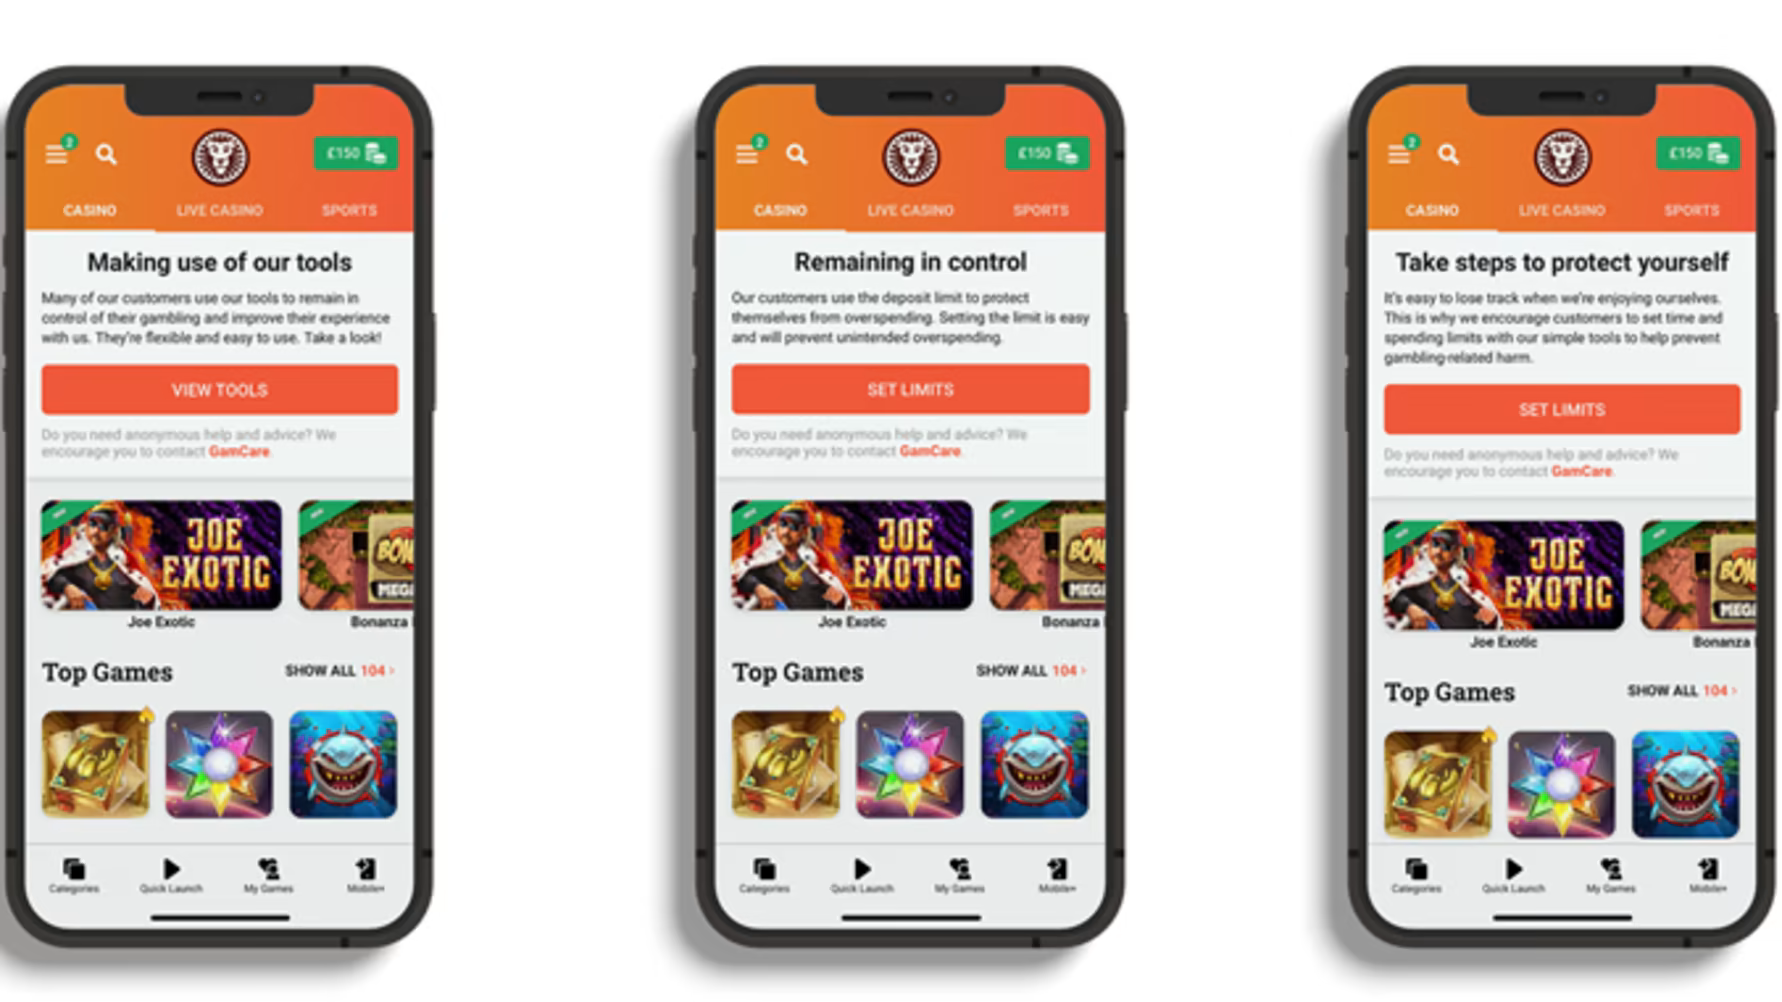 LeoVegas adds AI-powered onsite messages to increase awareness of safer gambling